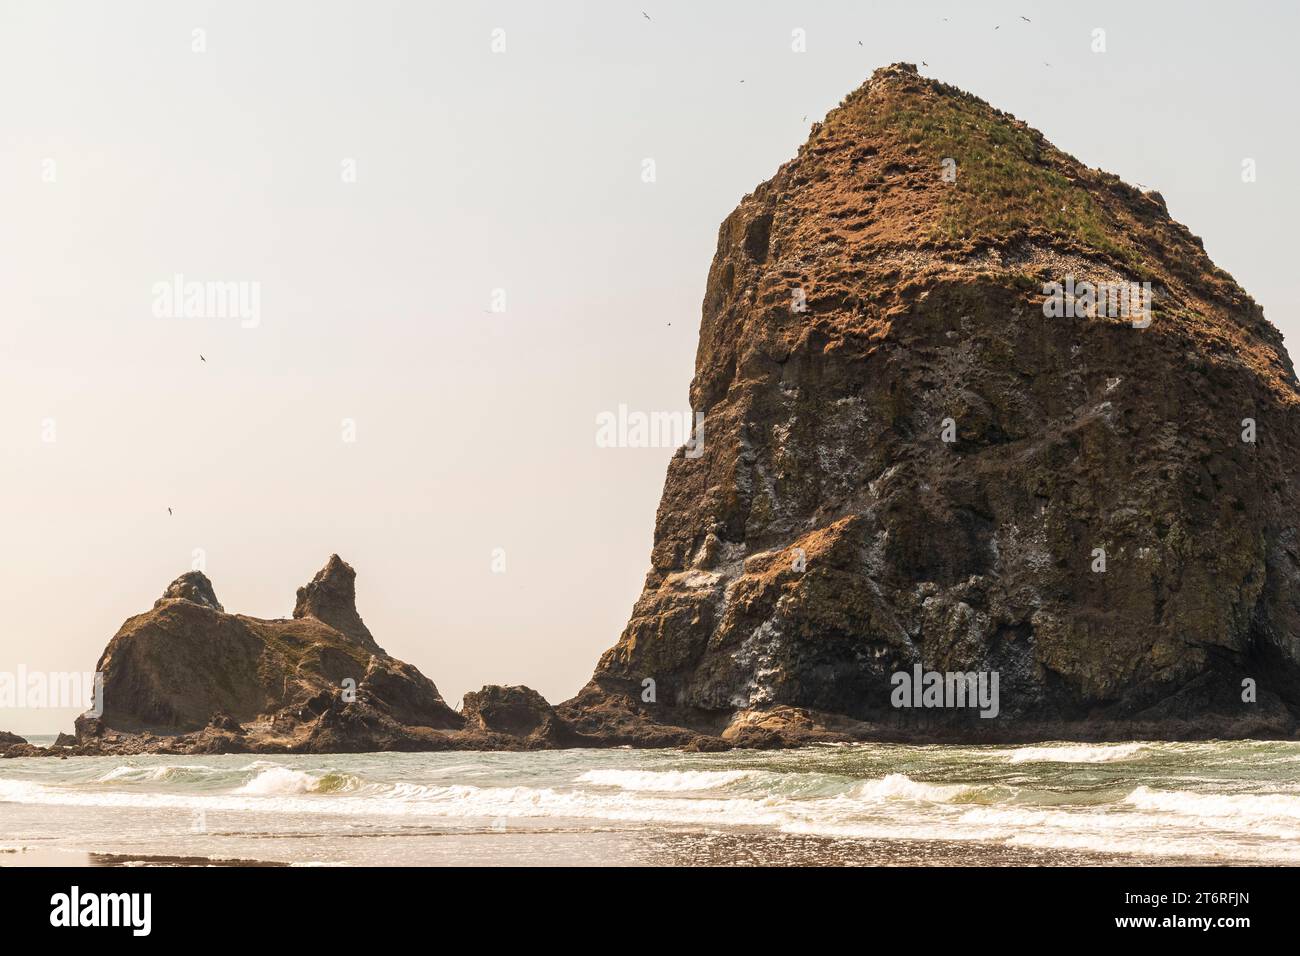 Haystack Rock, a designated bird sanctuary, rises out of the Pacific Ocean at crowded Cannon Beach, Oregon, on a summer day with pale clear skies. Stock Photo